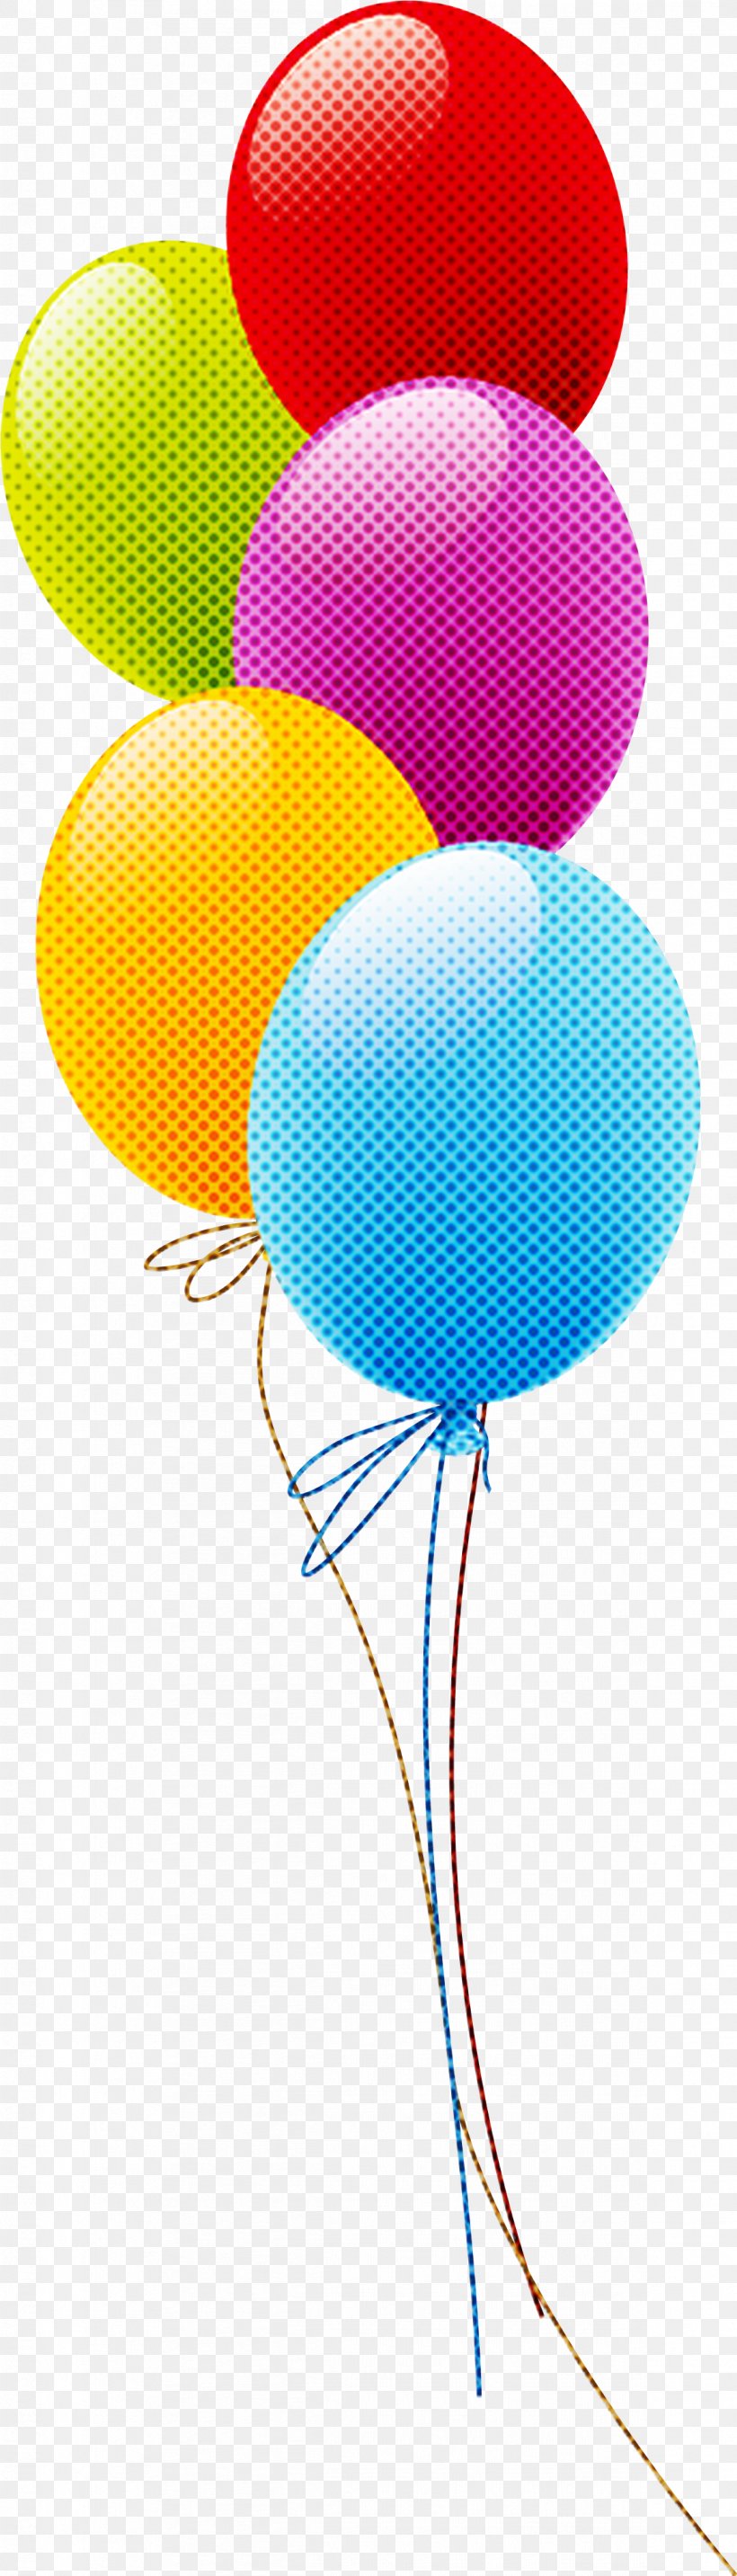 Balloon Turquoise Party Supply Pattern, PNG, 1163x4066px, Balloon, Party Supply, Turquoise Download Free